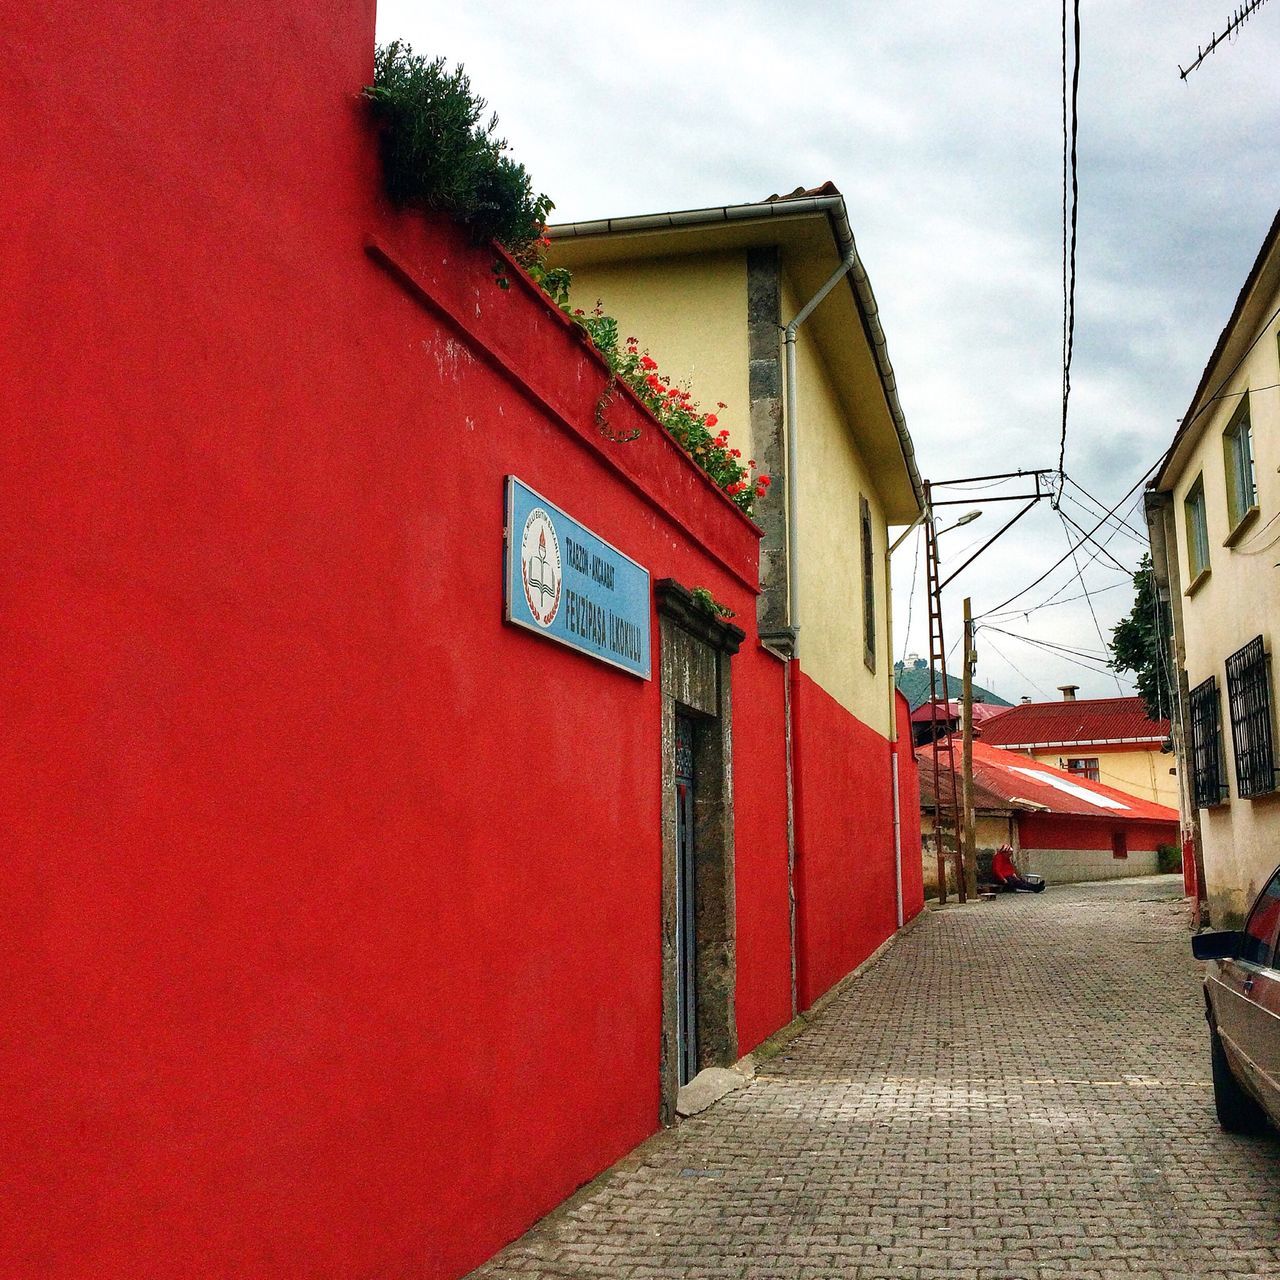 architecture, building exterior, built structure, red, the way forward, house, residential structure, street, residential building, sky, cobblestone, building, narrow, town, city, outdoors, day, no people, wall - building feature, road